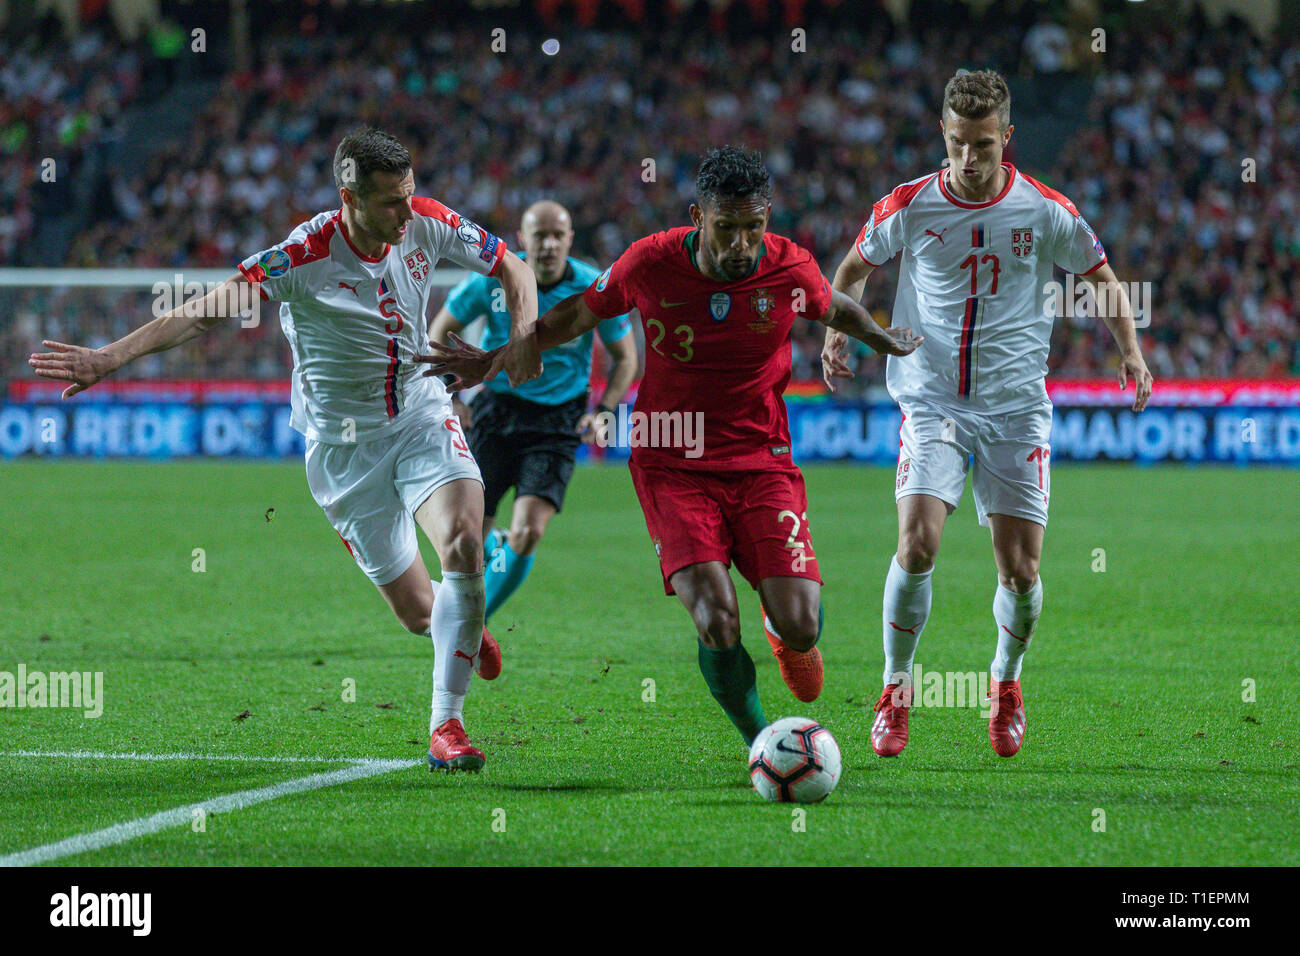 Lisbon, Portugal. 25th Mar, 2019. March 25, 2019. Lisbon, Portugal. Portugal's and Braga forward Dyego Sousa (23) during the European Championship 2020 Qualifying Round between Portugal and Serbia Credit: Alexandre de Sousa/Alamy Live News Stock Photo